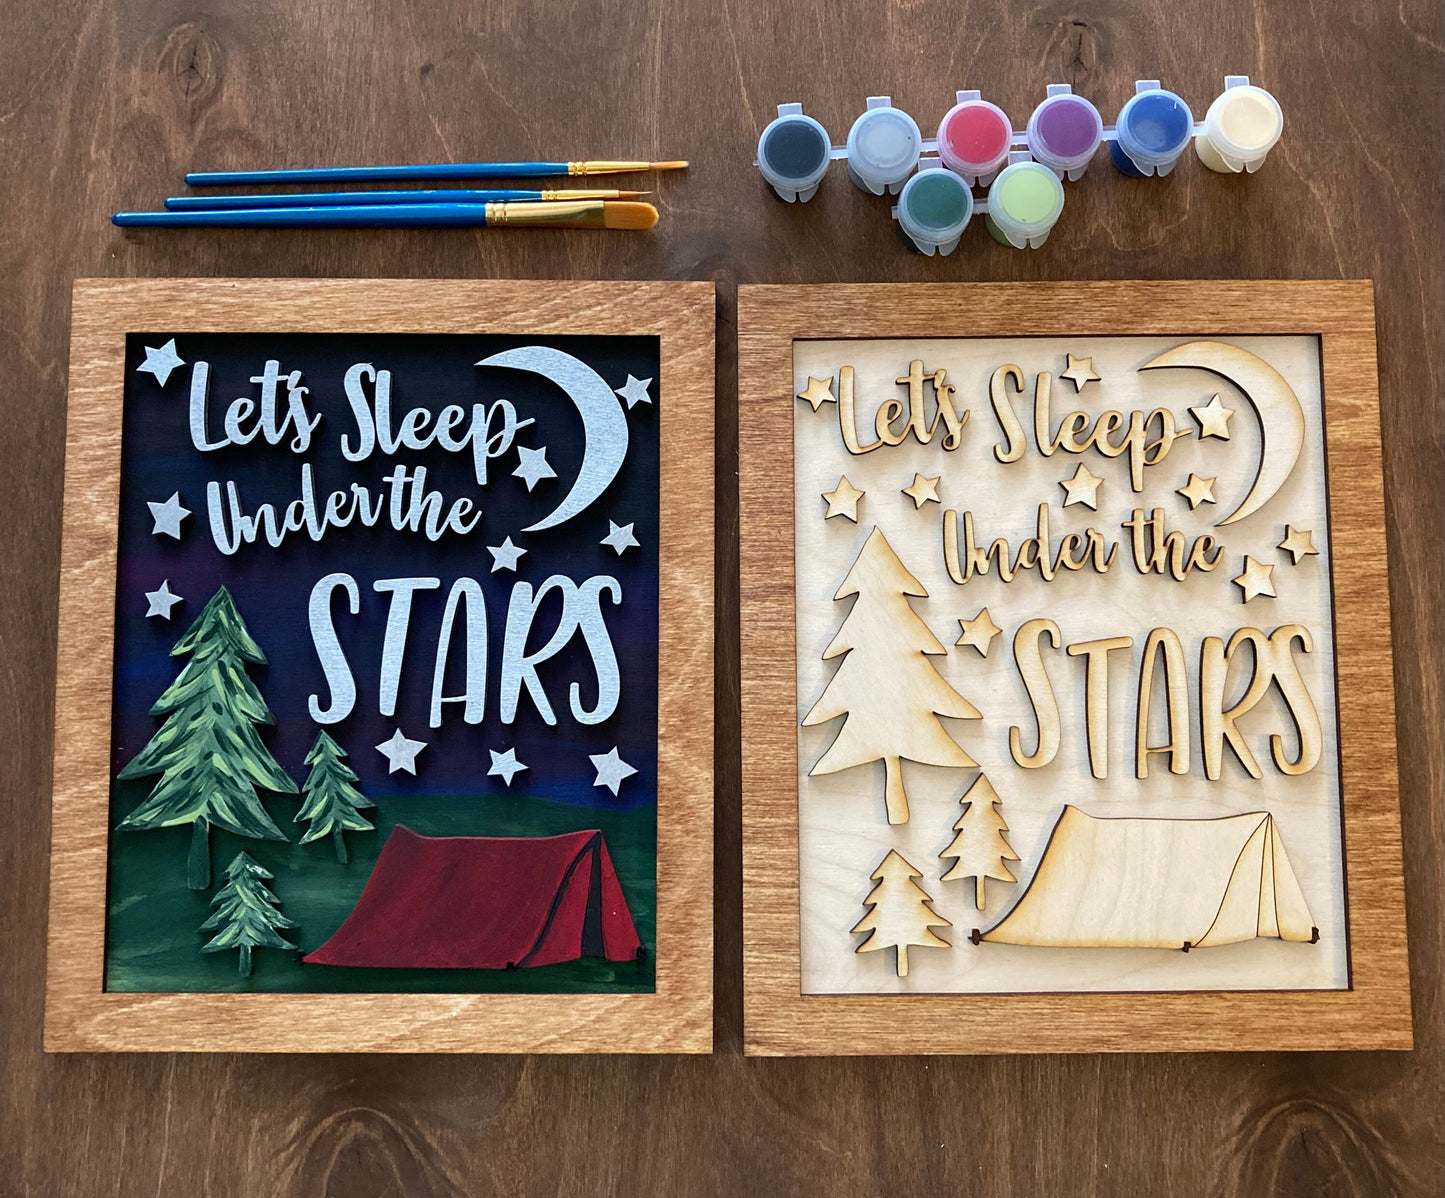 Let's Sleep Under The Stars DIY Painting Kit, DIY Paint at Home Kit, Gift for Her, Craft Kit for Adults, Craft for Teens, Gift for Him